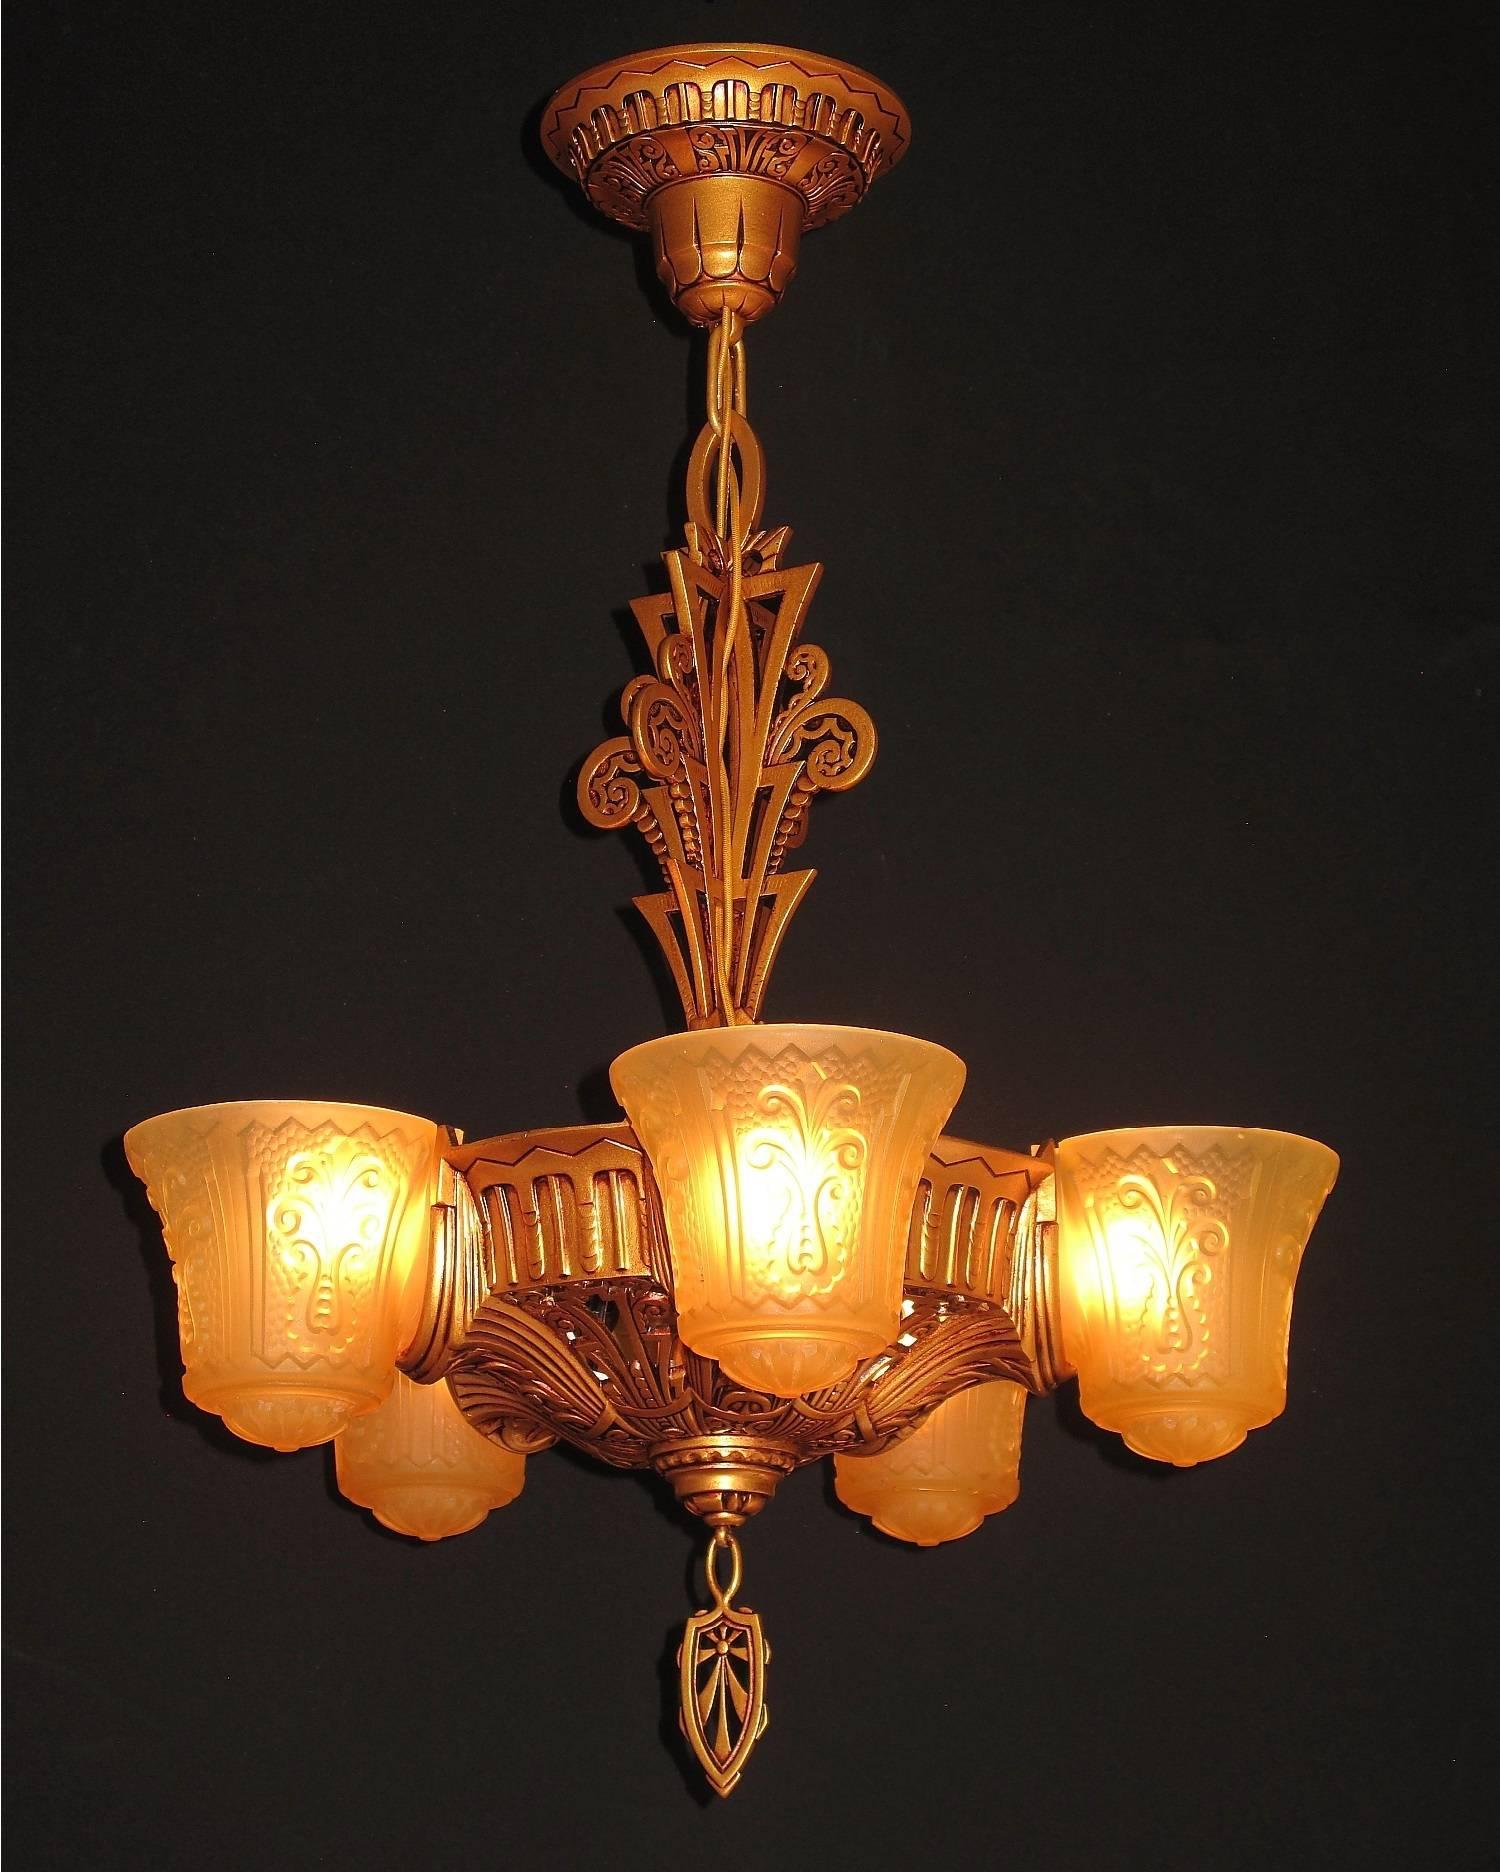 2 matching vintage ceiling fixtures from one of the great American design firms during the 1920s and 1930s. 